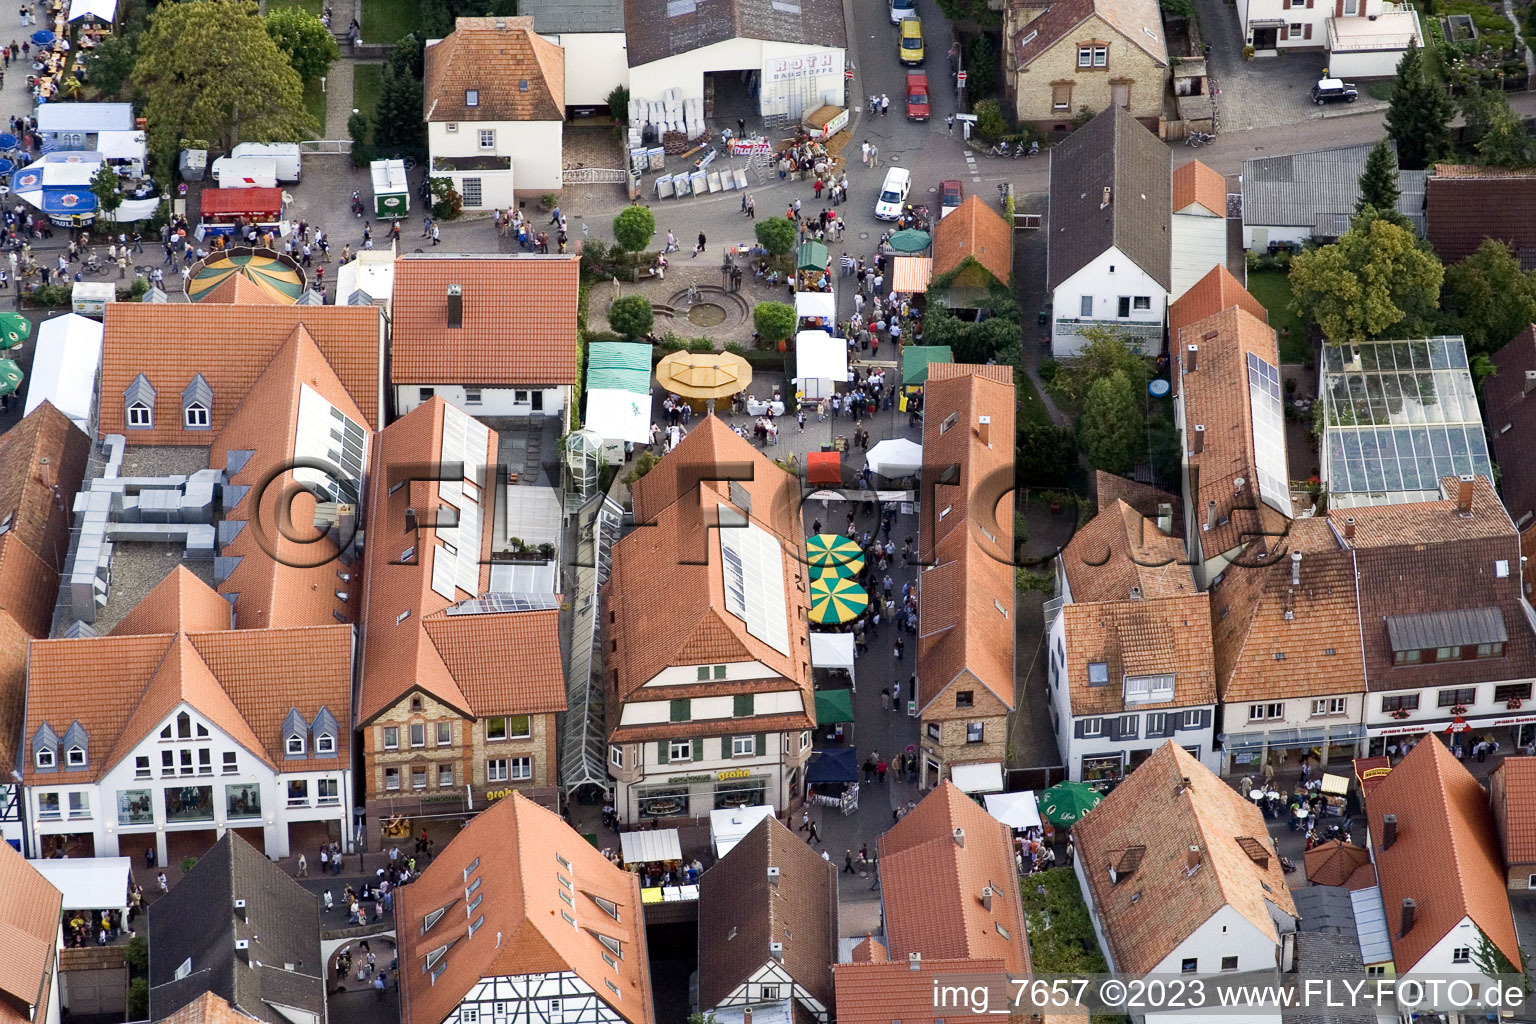 Aerial view of City festival, Hauptstr in Kandel in the state Rhineland-Palatinate, Germany